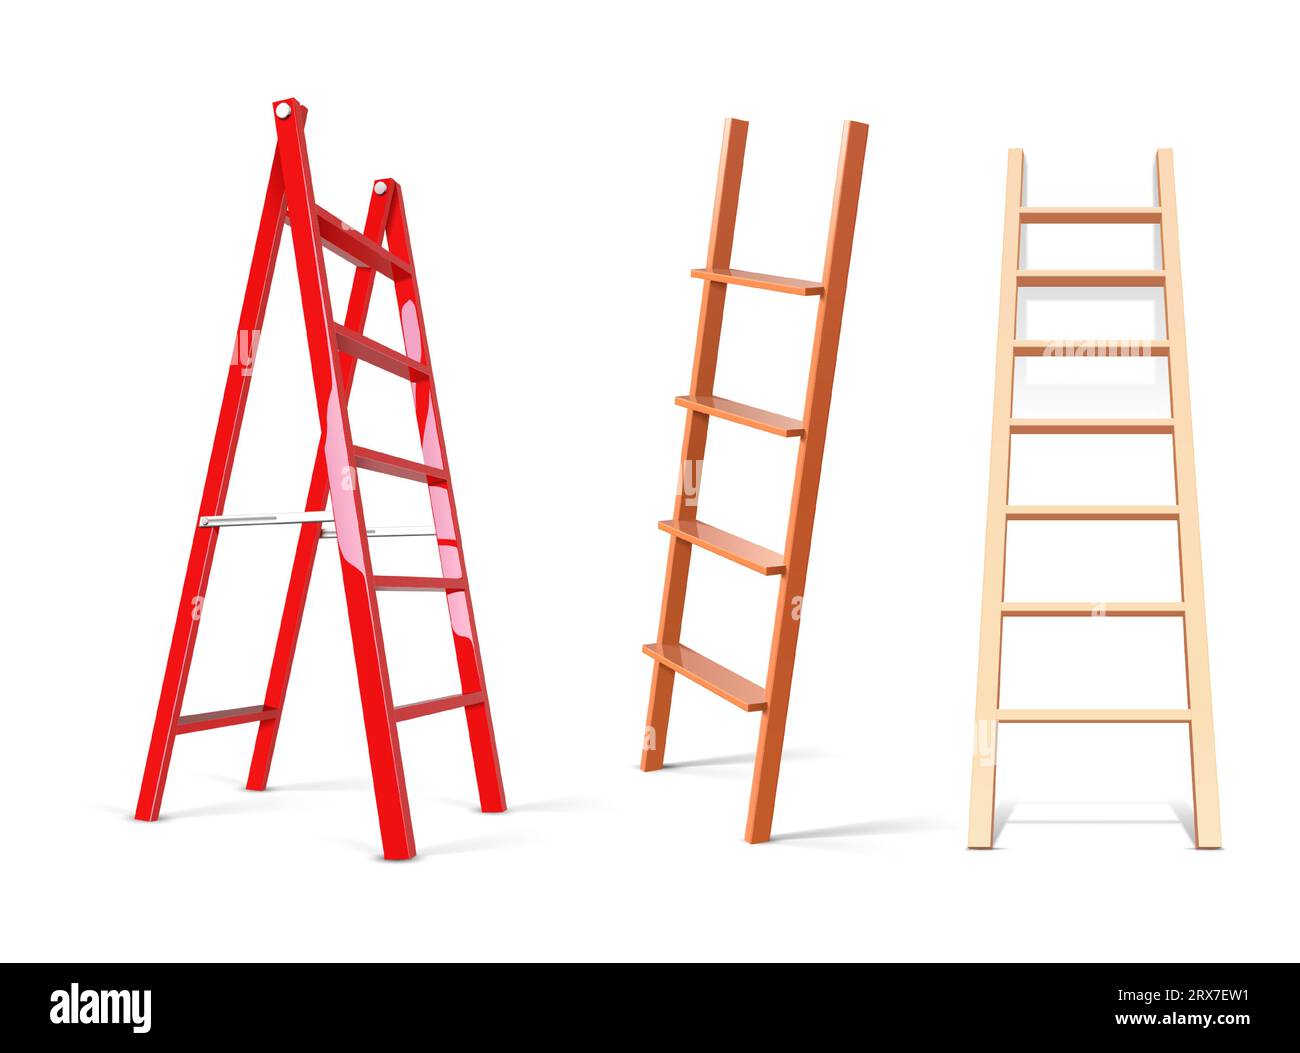 Ladder construction. Realistic wooden and glossy metal staircase equipment. 3D building stepladders. Isolated vertical tools for climbing. Household repair instruments with steps. Vector stairways set Stock Vector